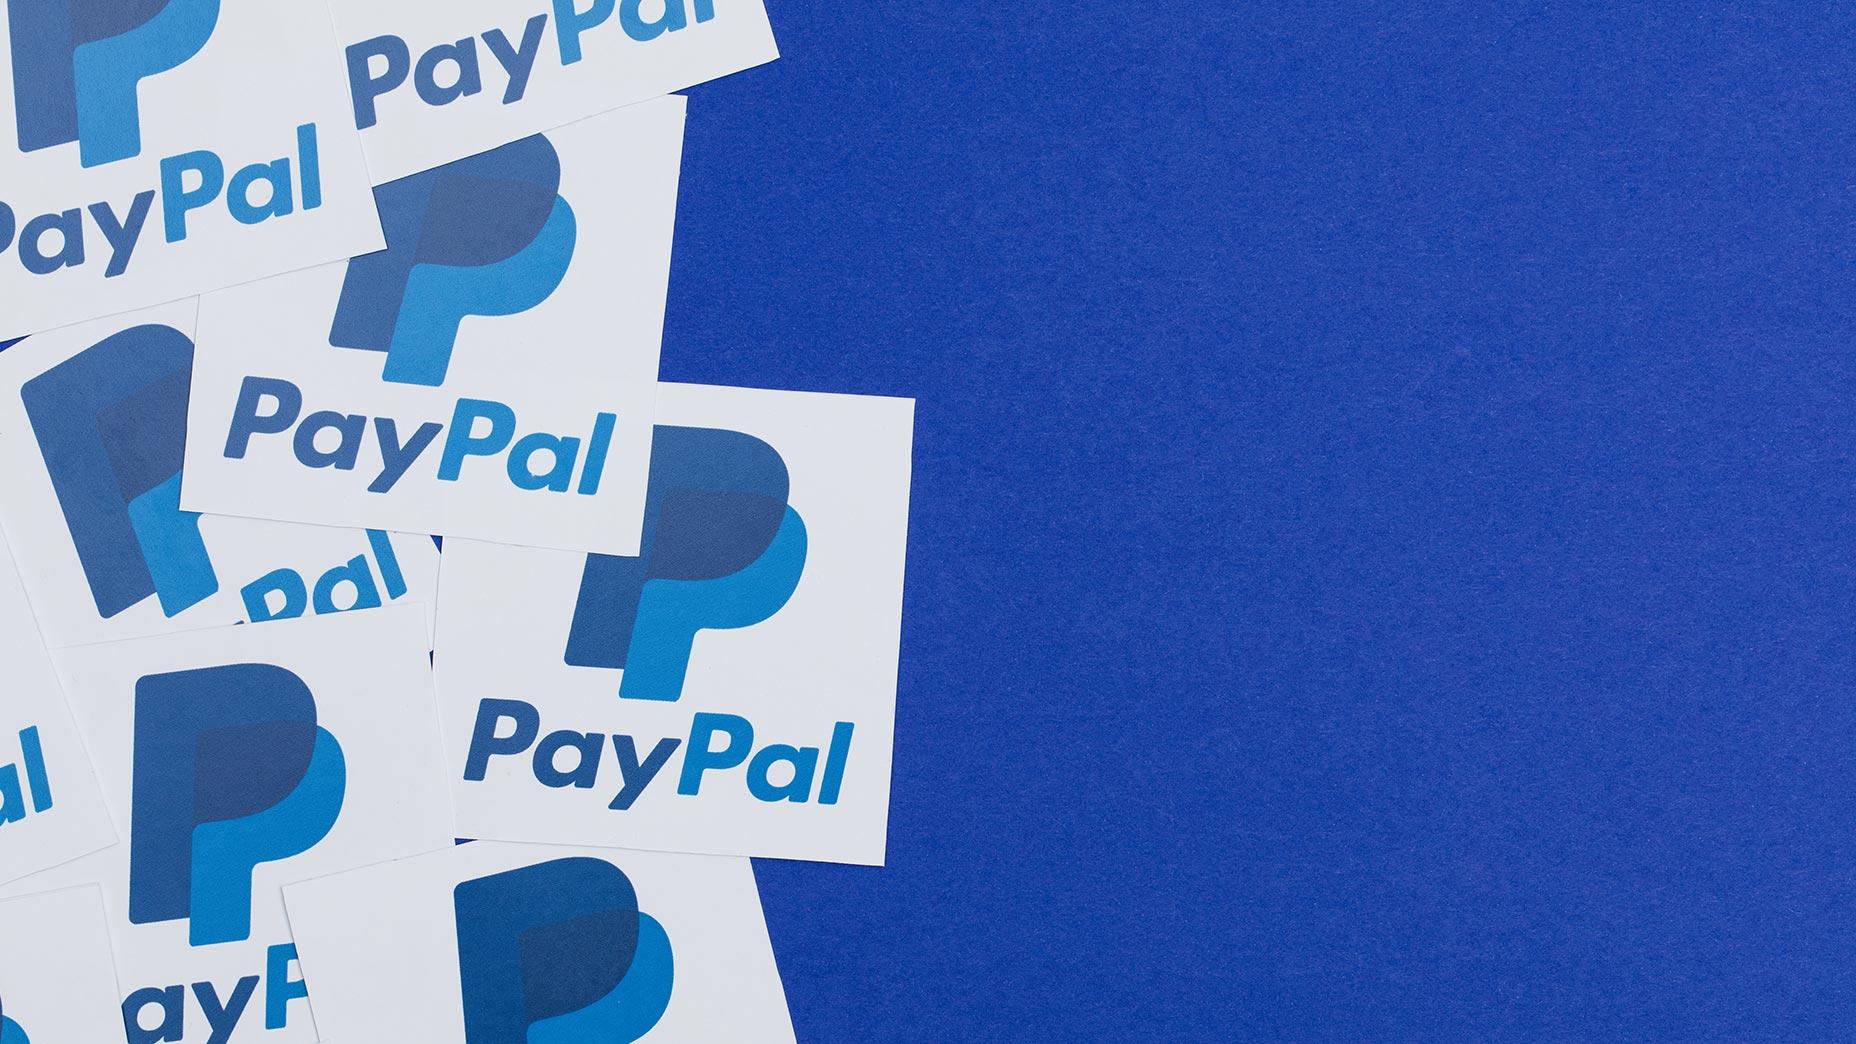 PayPal Stock Analysis: Reasons for Price Drop, and Growth Potential